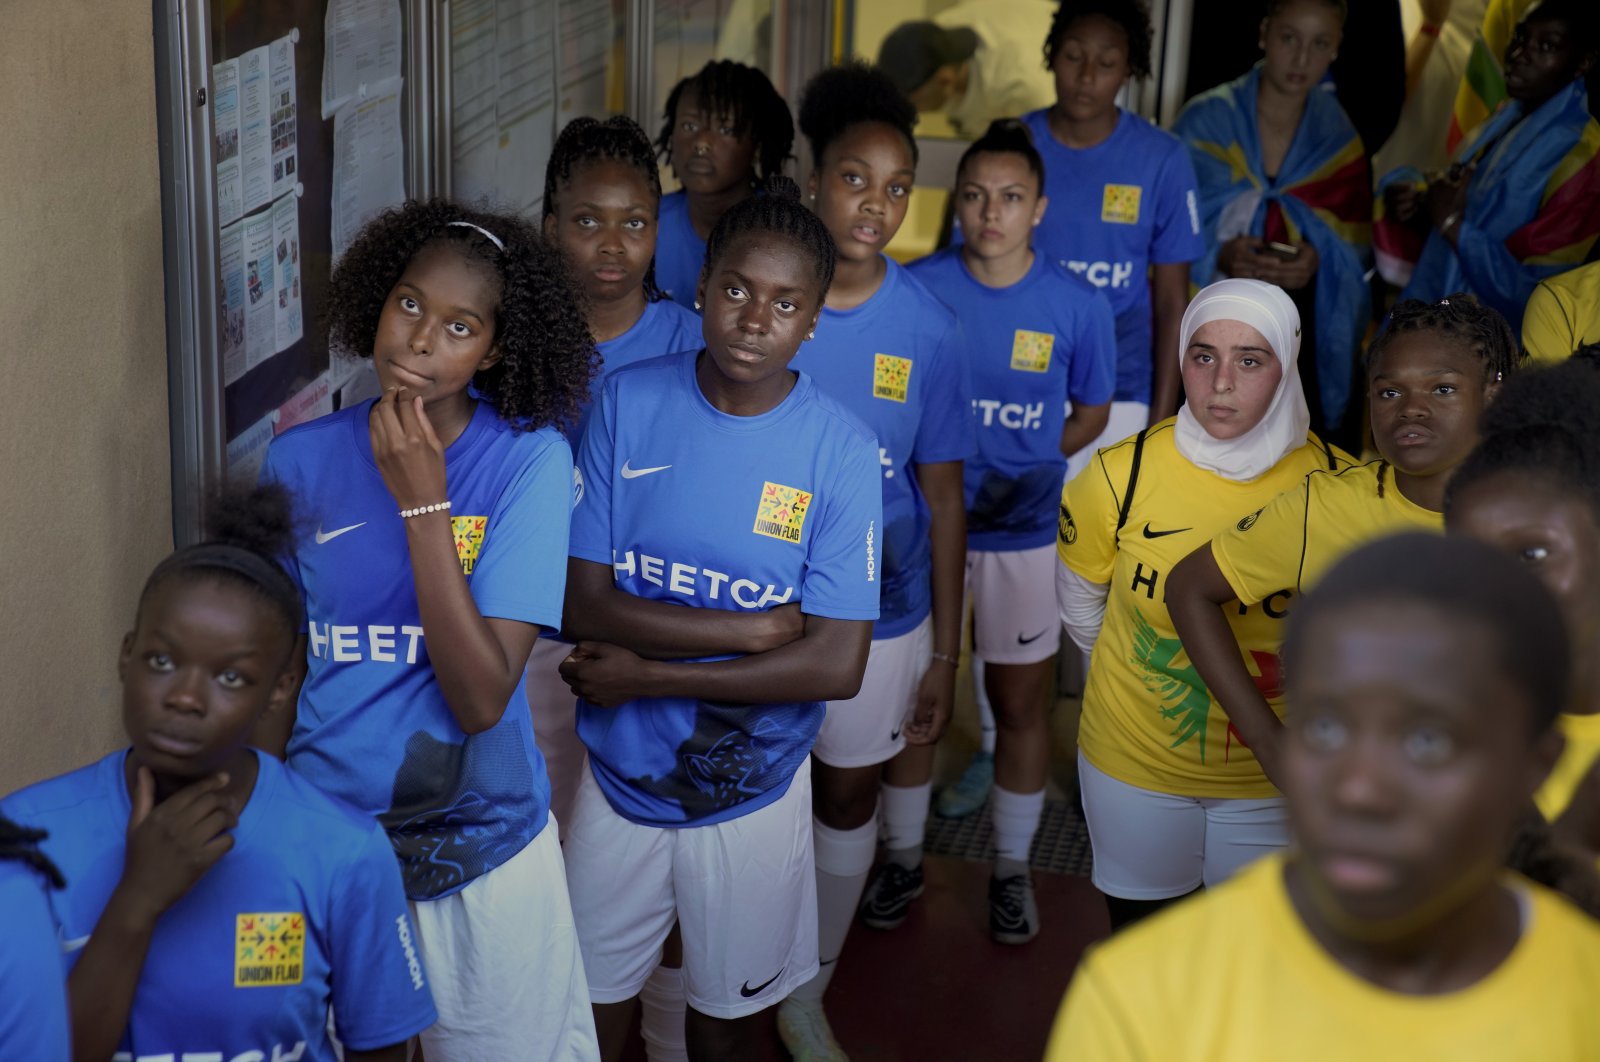 Players wait before entering the field prior to the final women&#039;s game of the national cup of working-class neighborhoods between a team representing players with Malian heritage against one with Congolese roots, in Creteil, France, July 2, 2022. (AP Photo)